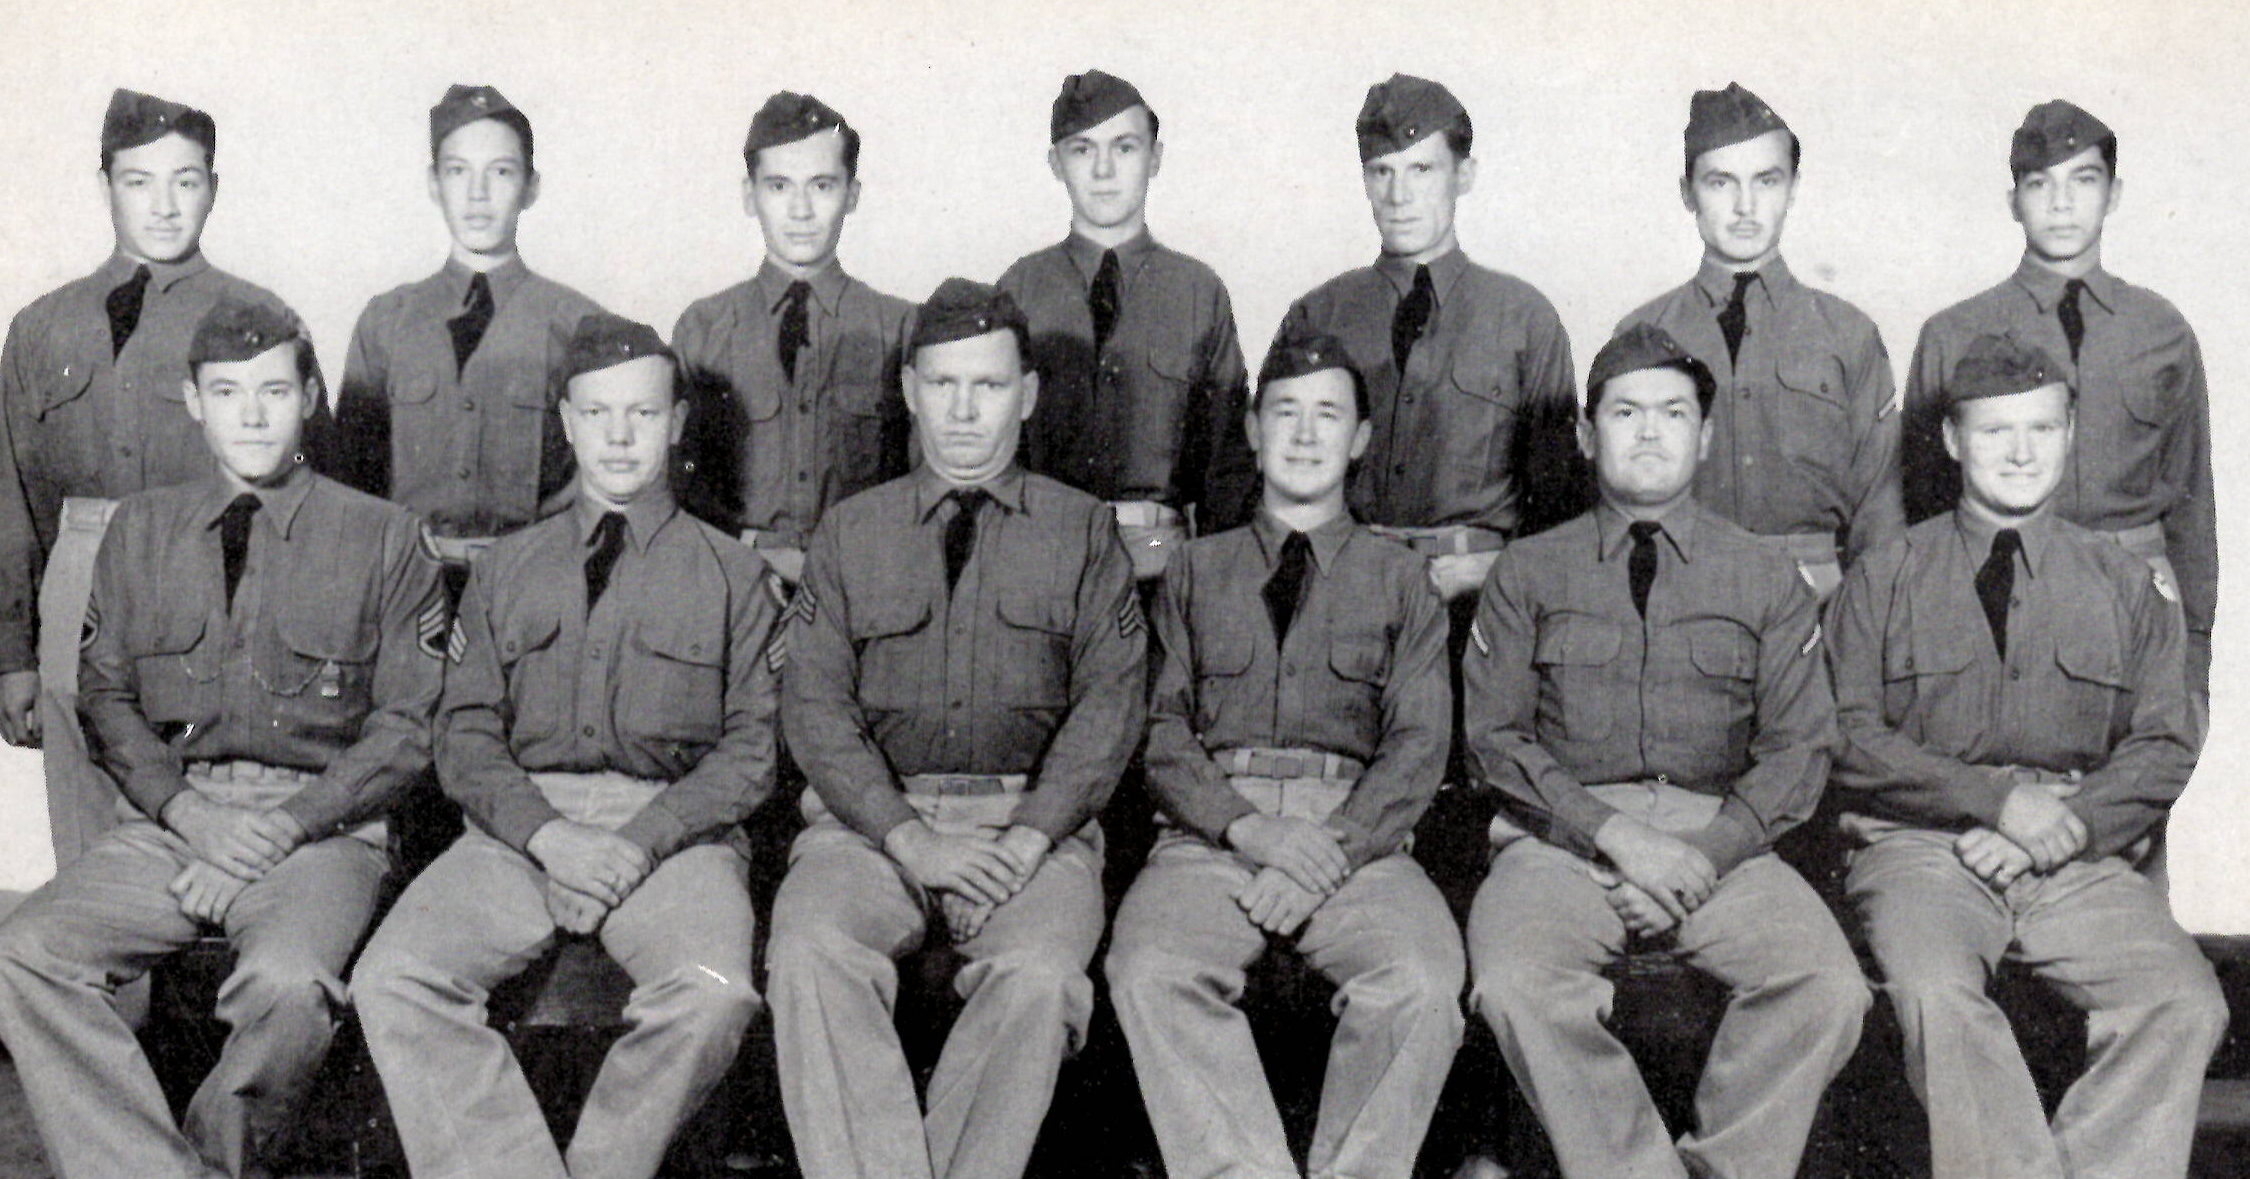 Medical Department Detachment Special Troops, 36th Infantry Division - 1940